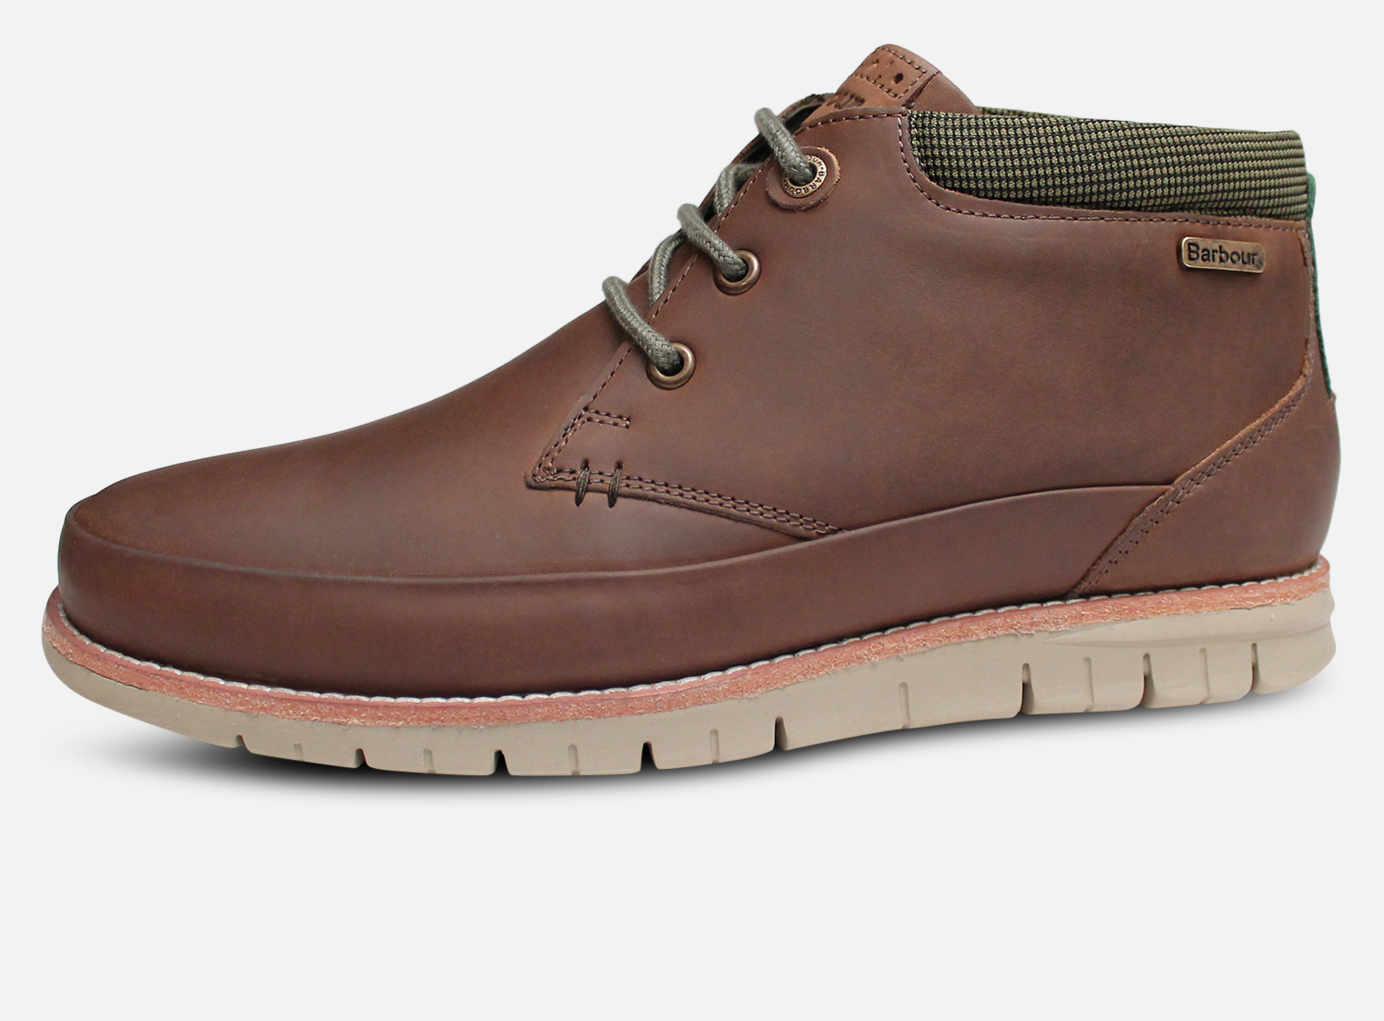 Barbour Nelson III Lightweight Casual Boots in Choco